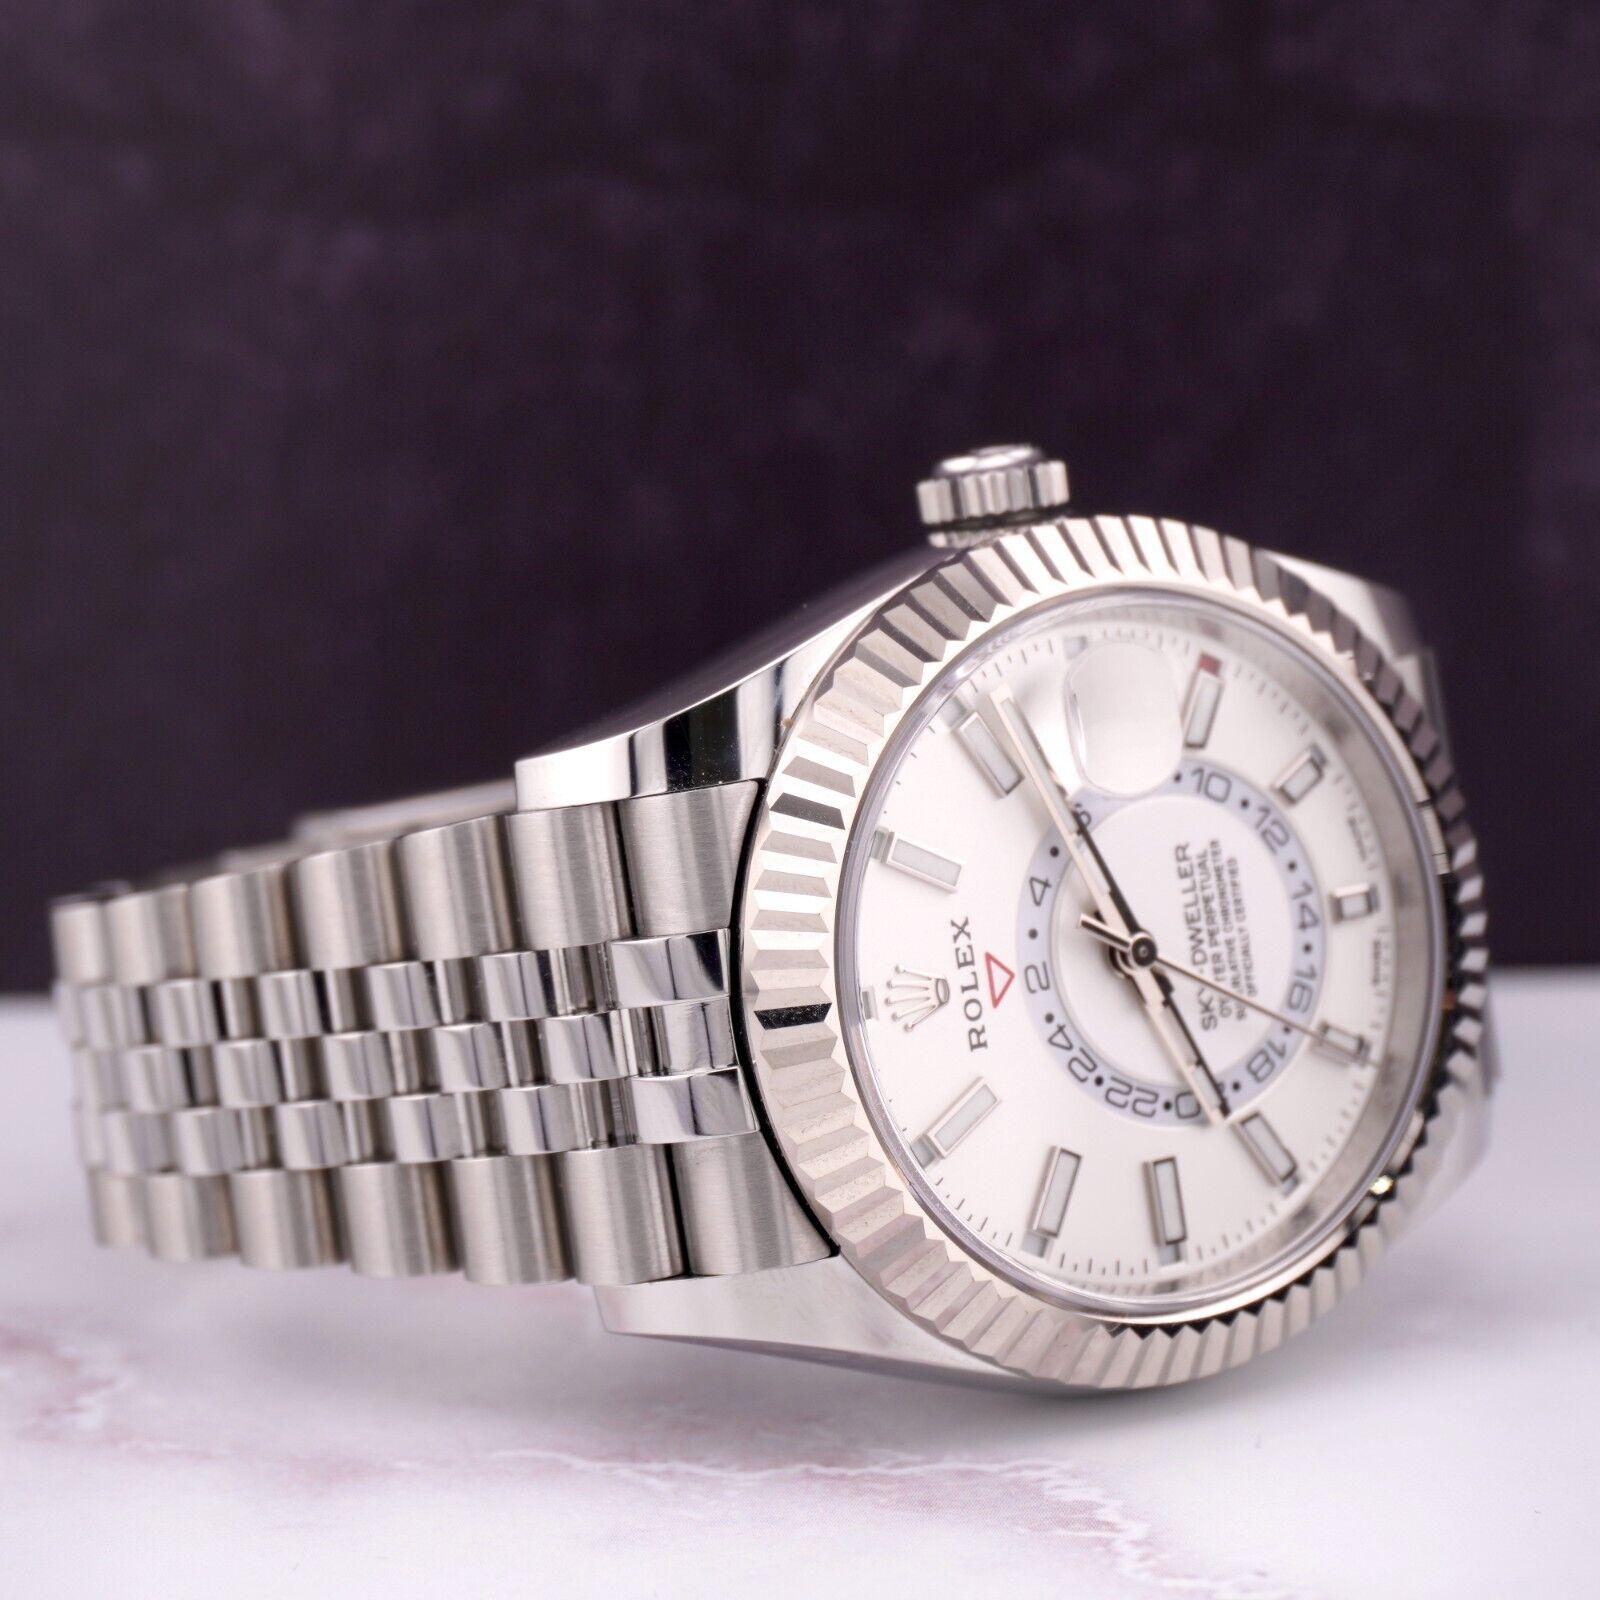 Rolex Sky-Dweller 42mm Watch. A Pre-owned watch w/ Original Box and 2022 Card. Watch is 100% Authentic and Comes with Authenticity Card. Watch Reference is 326934 and is in Excellent Condition (See Pictures). The dial color is White and material is